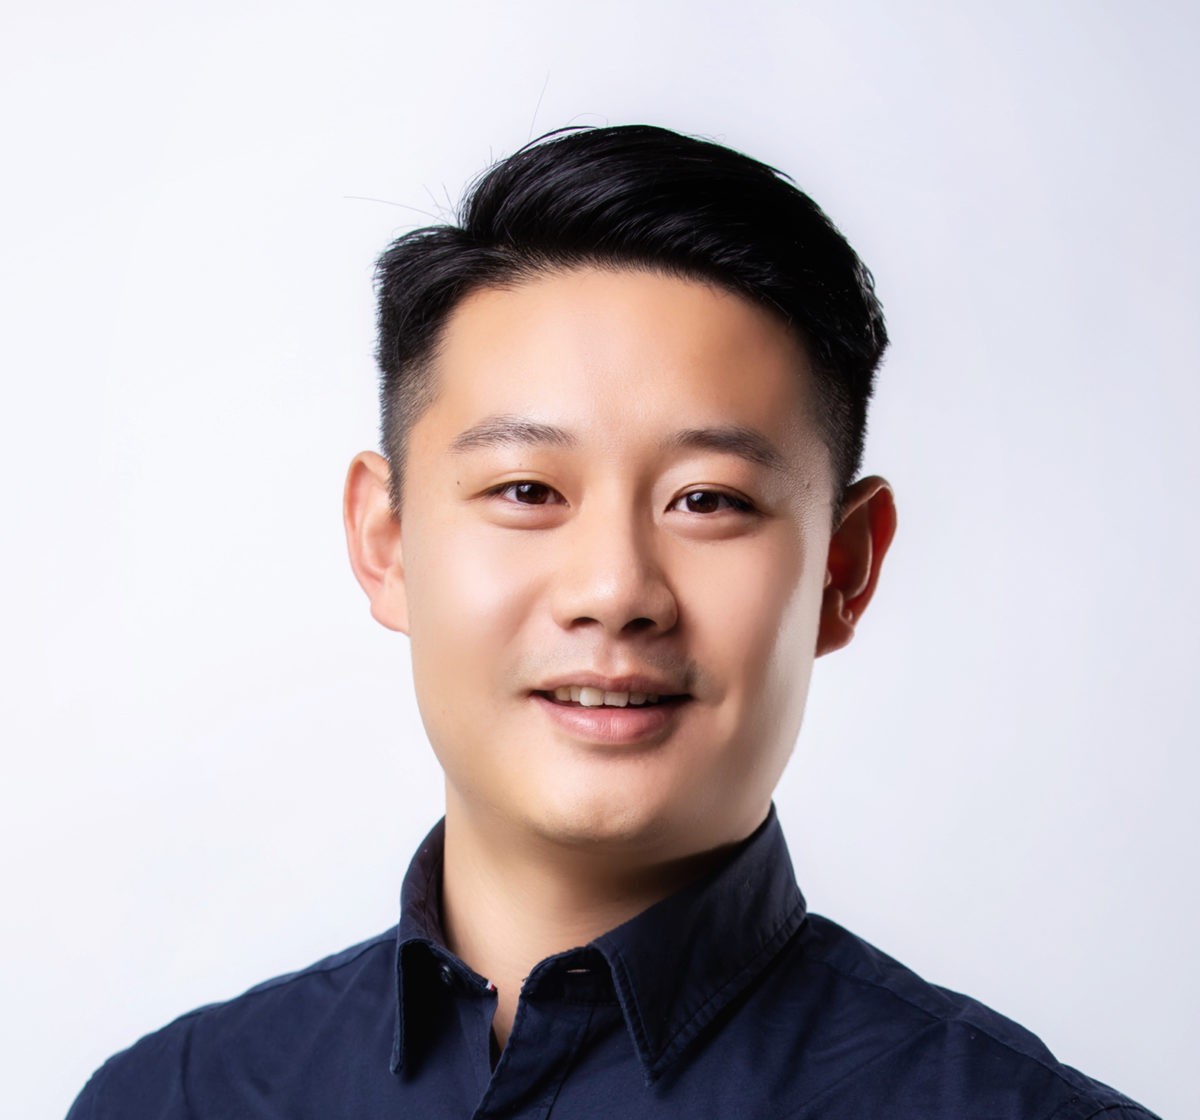 Dapeng  Wang, Dev Engineer, ING NEO  Banks and Financial Services to speak on “User Cases and Current Deployments” at IQT Quantum Cybersecurity in NYC Oct 25-27